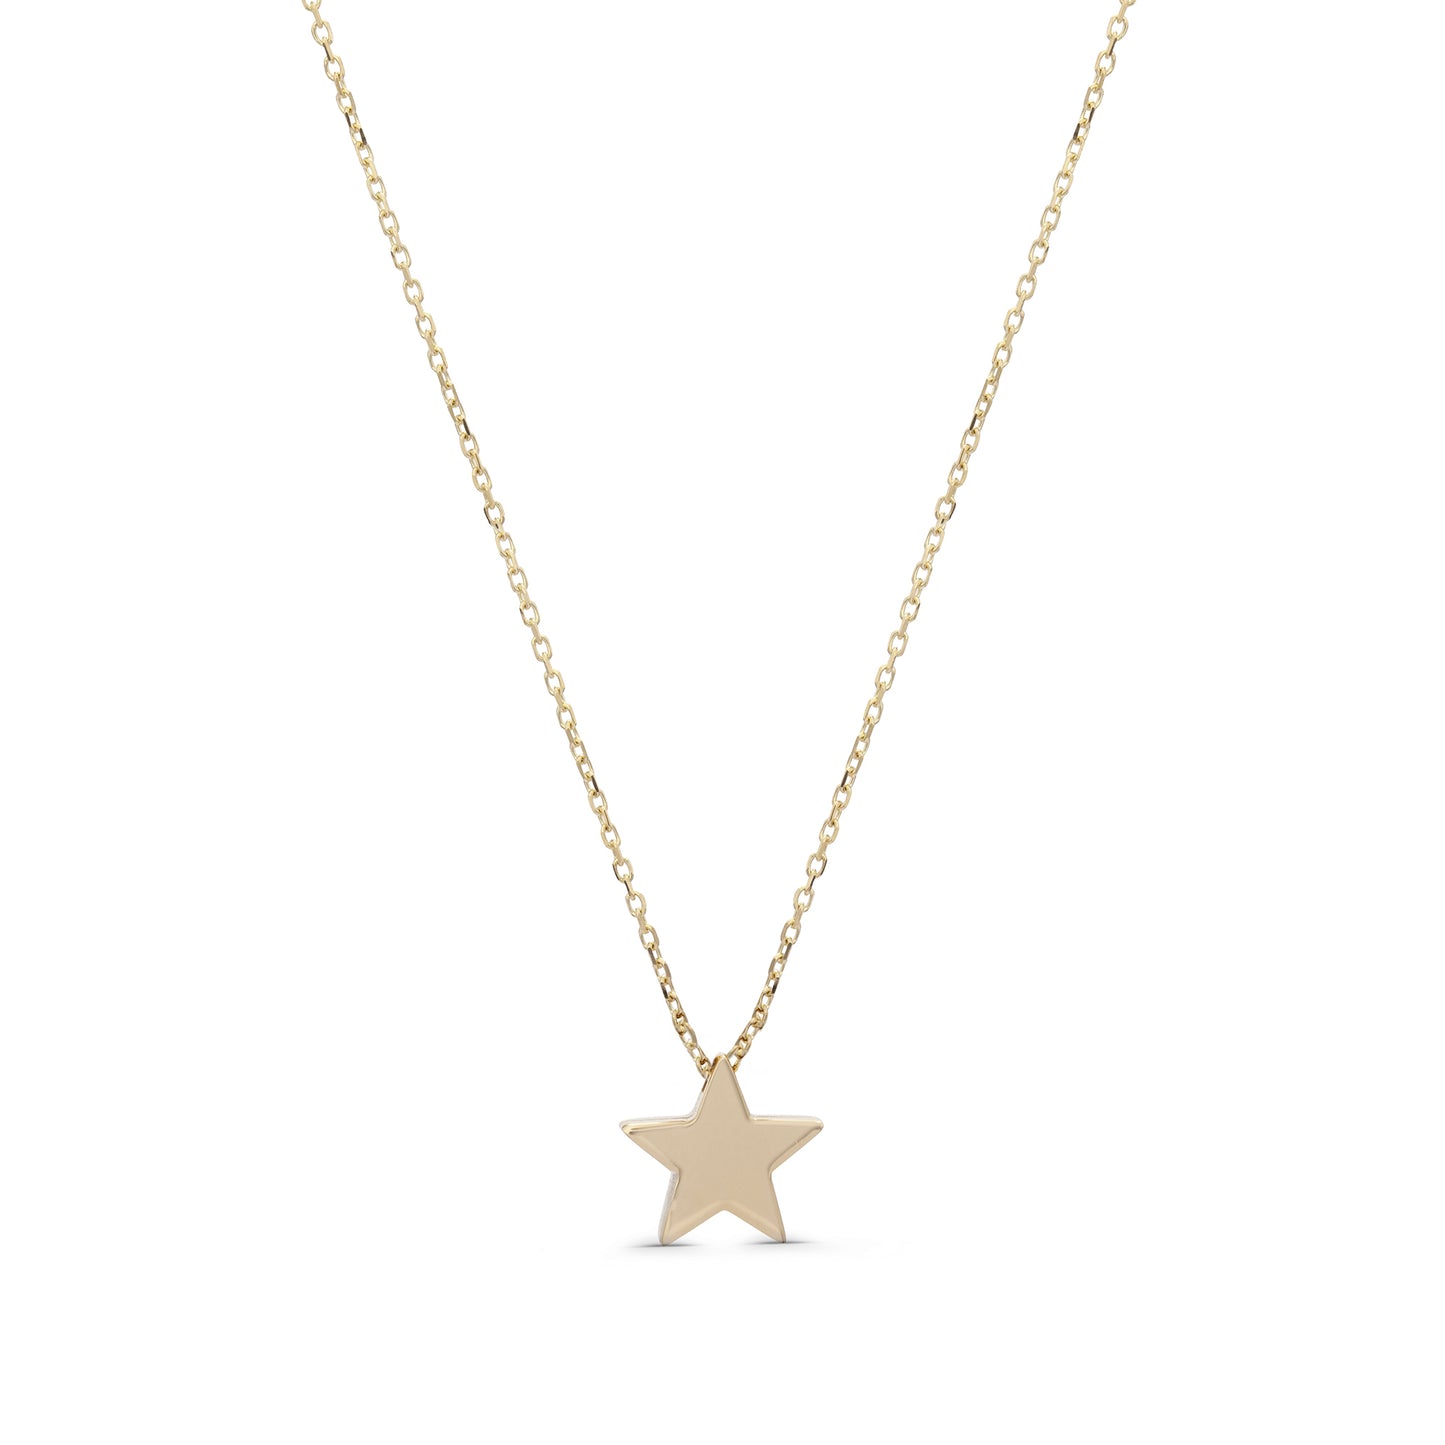 3D Star Necklace